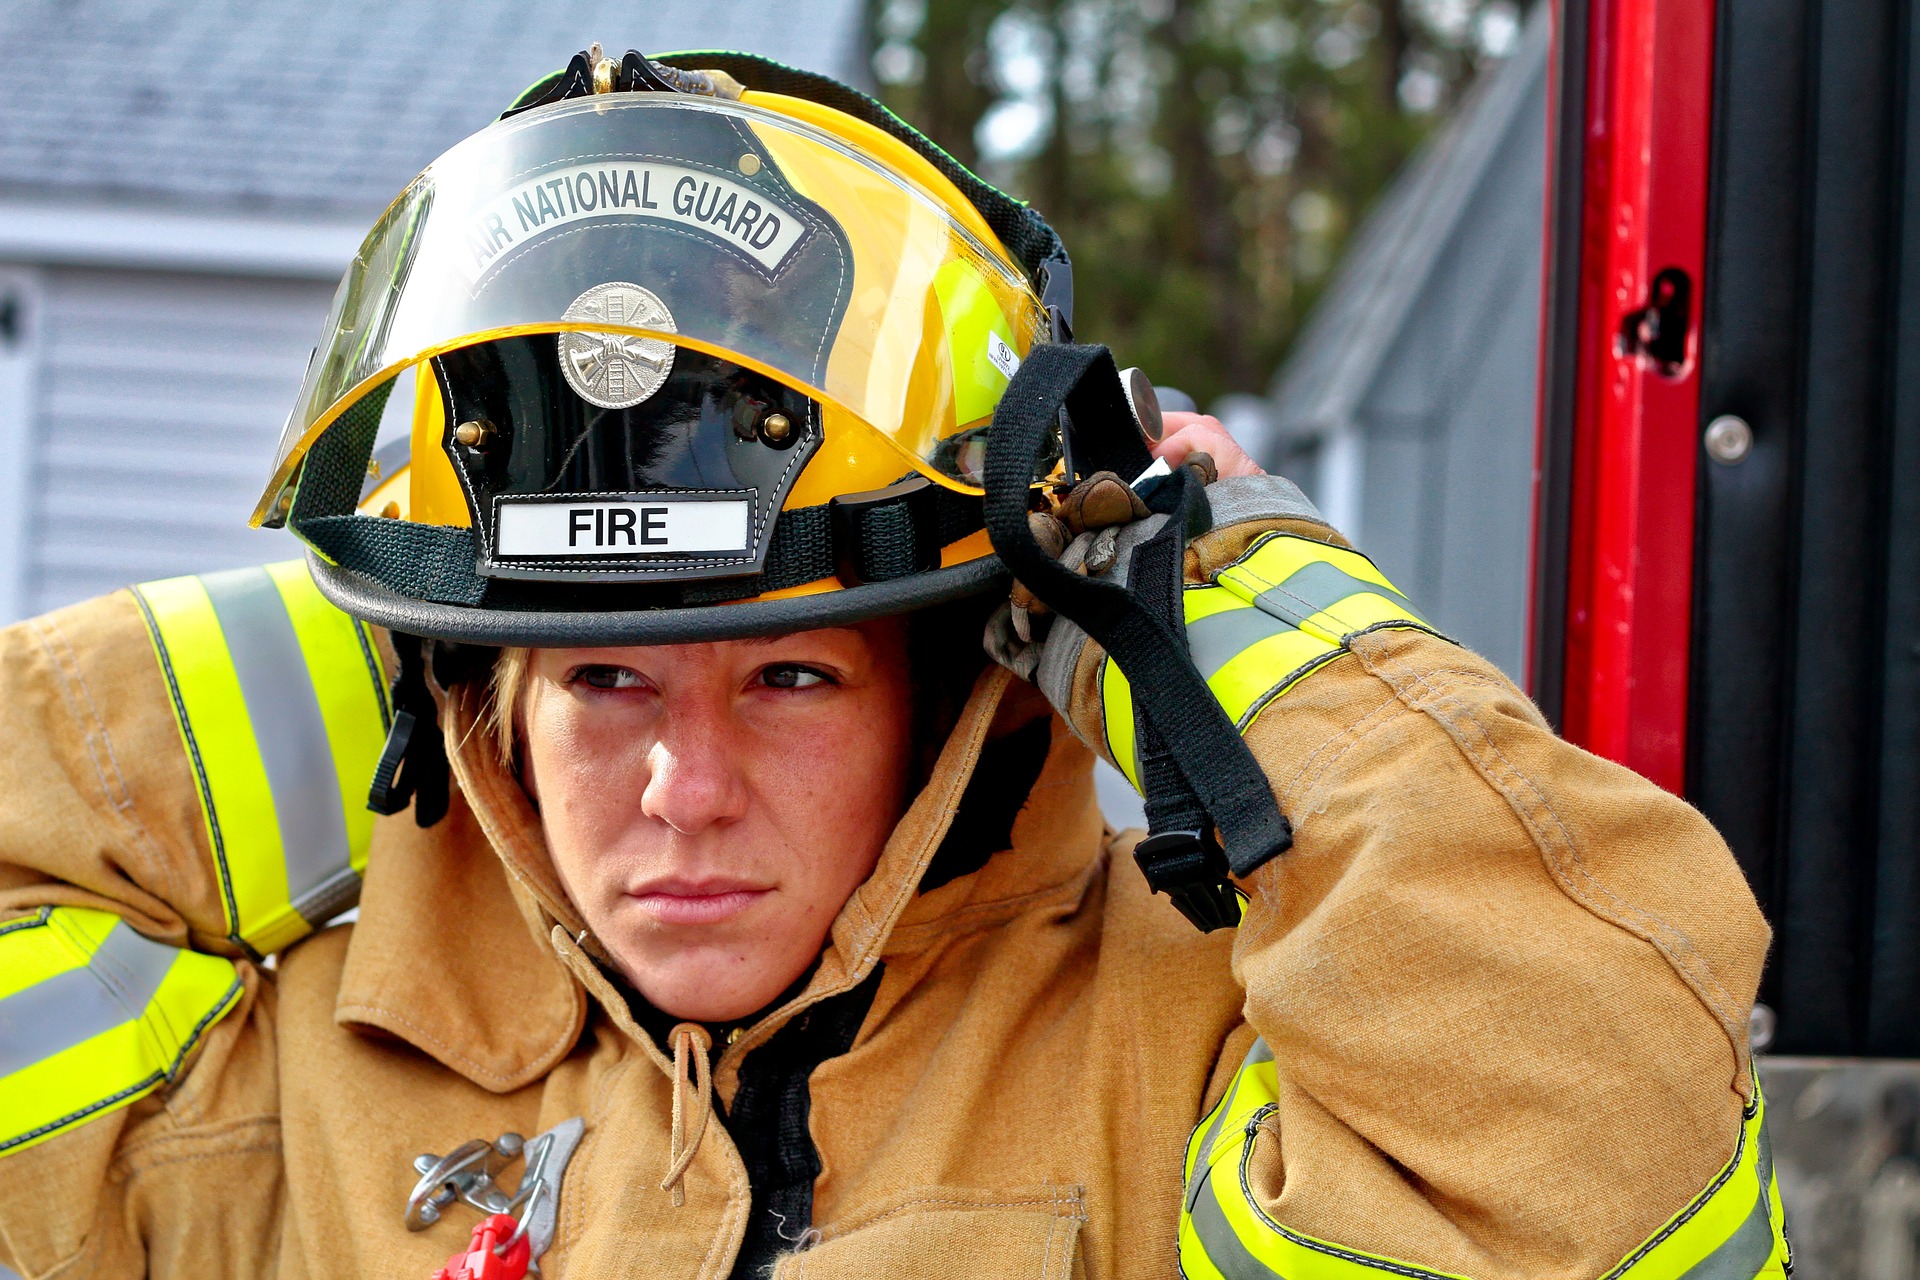 A woman in a firefighter's uniform prepares for duty.